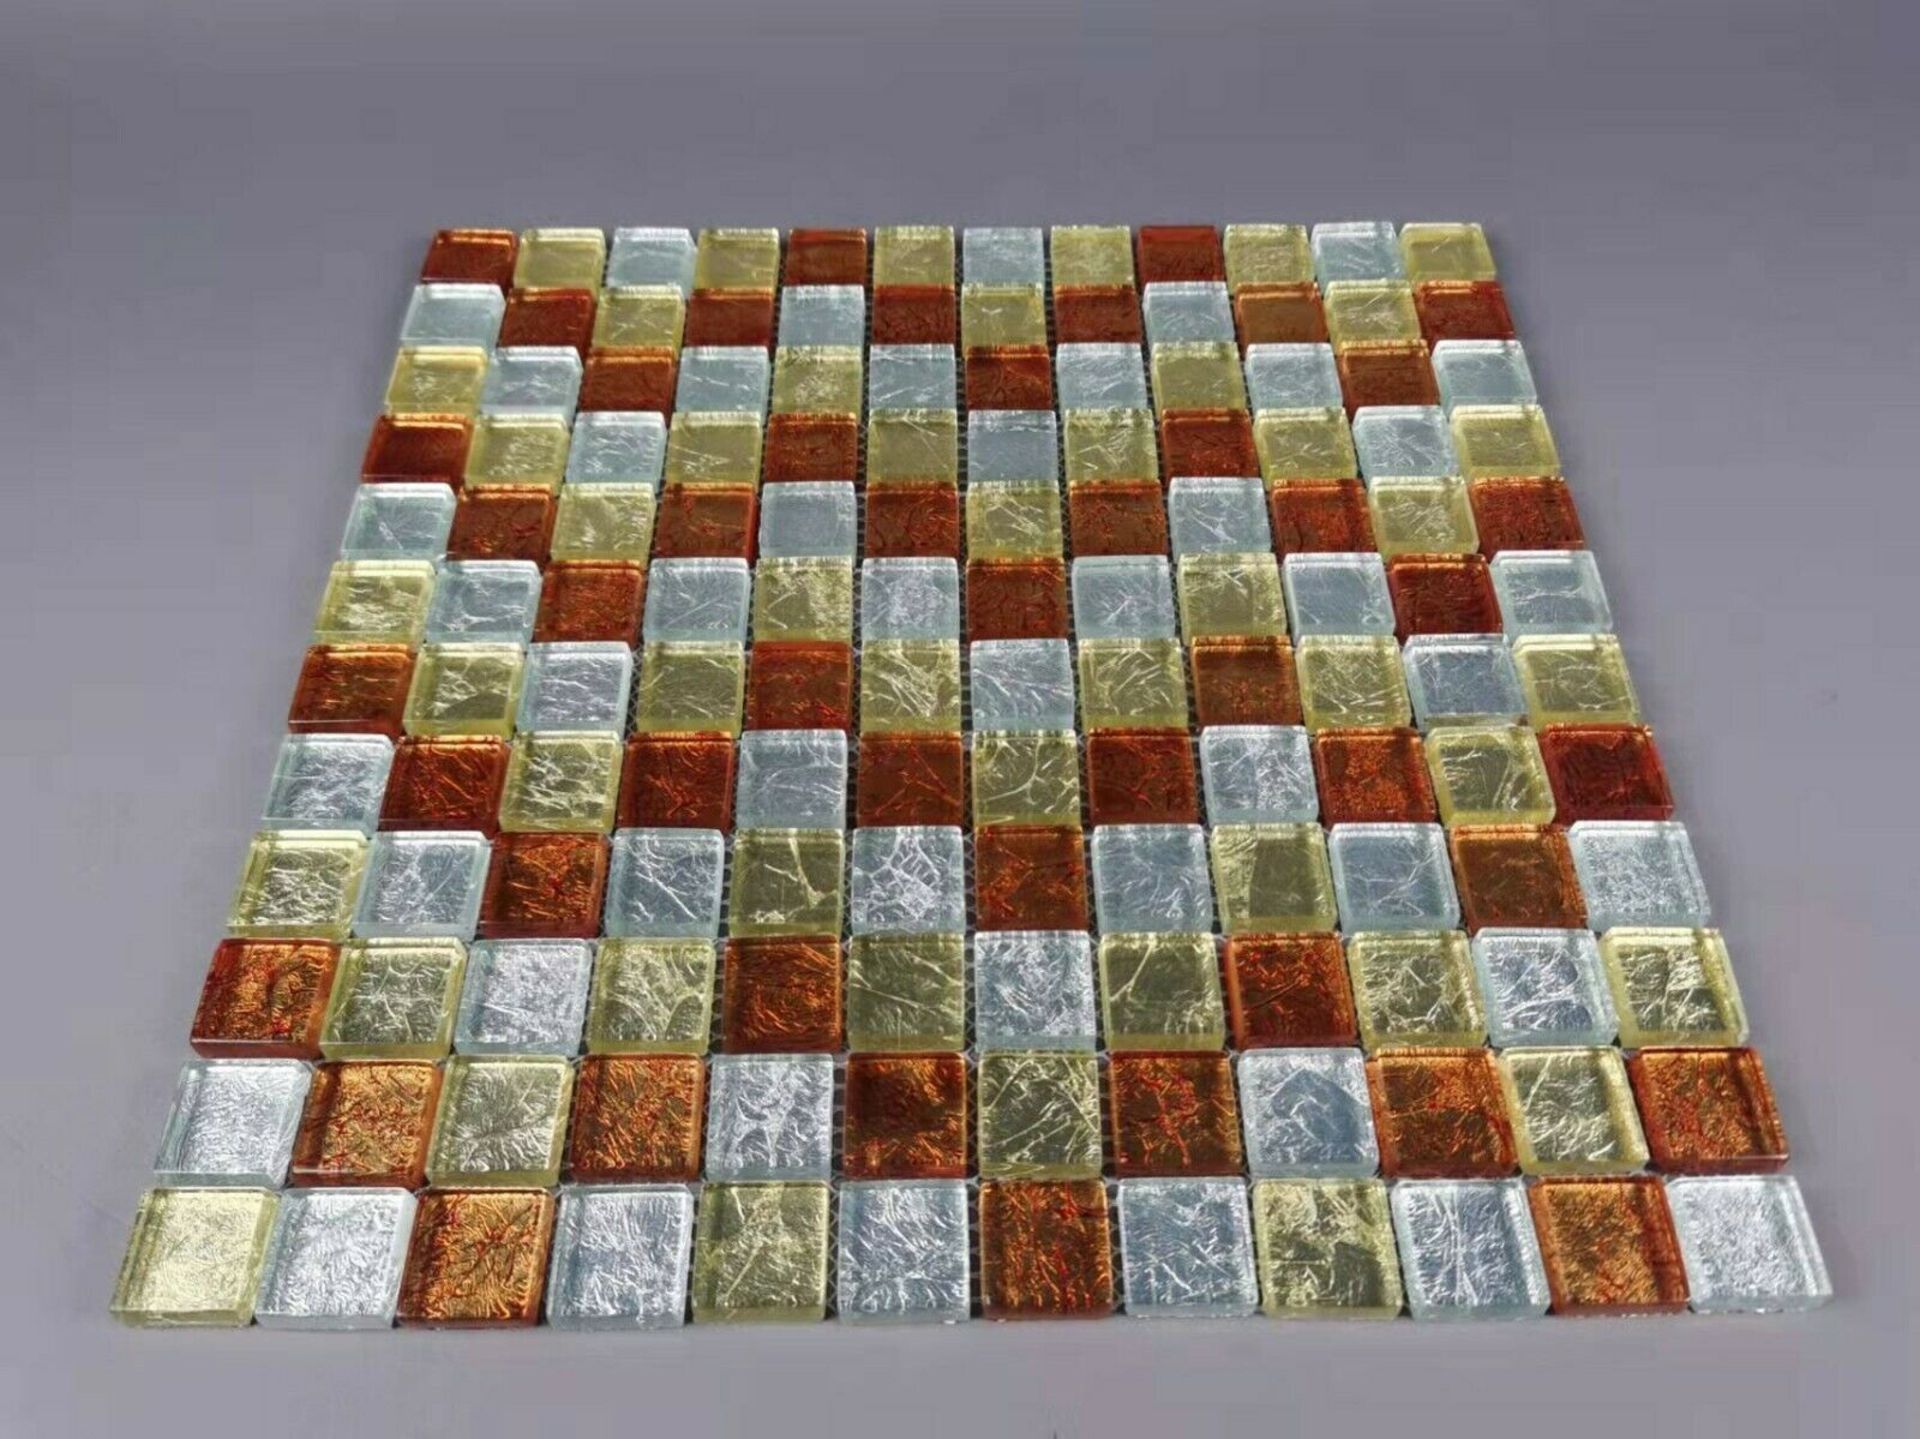 Stock Clearance High Quality Glass/Stainless Steel Mosaic Tiles - 11 Sheets - One Square Metre - Bild 4 aus 4